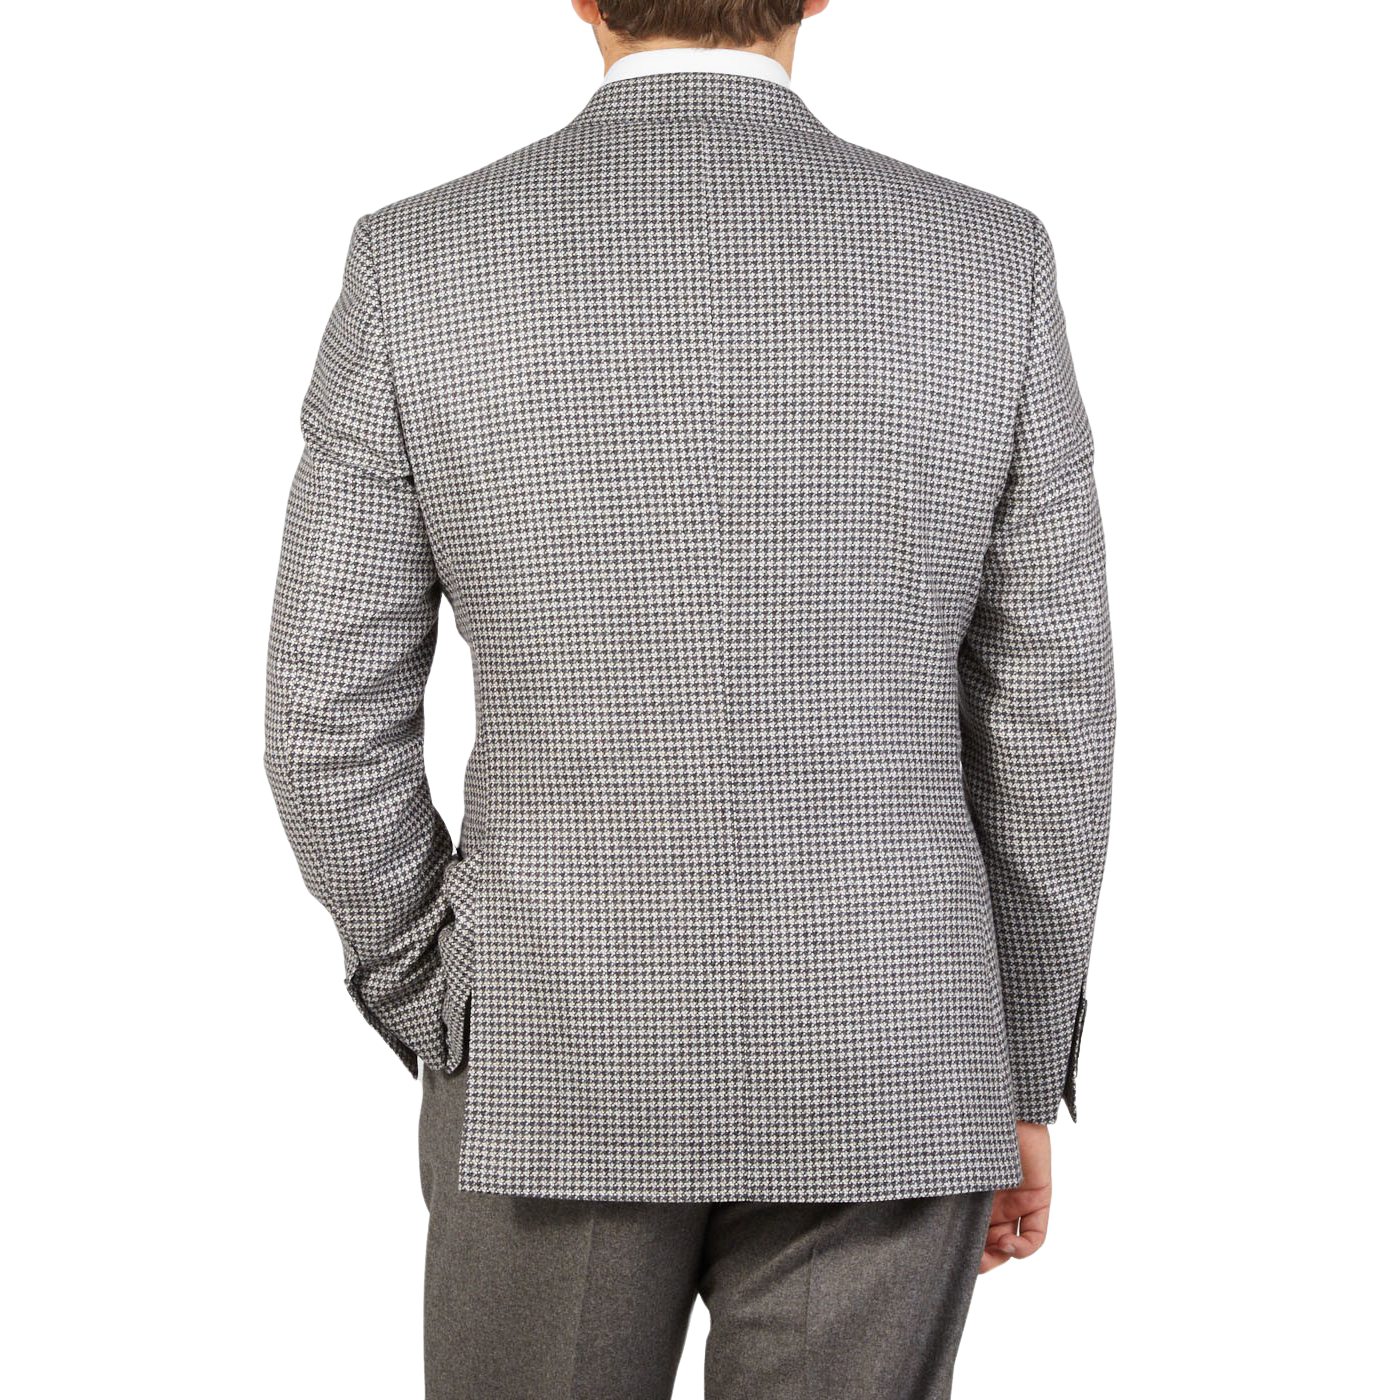 The back view of a man in a Grey Houndstooth Wool Drop 6 Blazer by Canali.